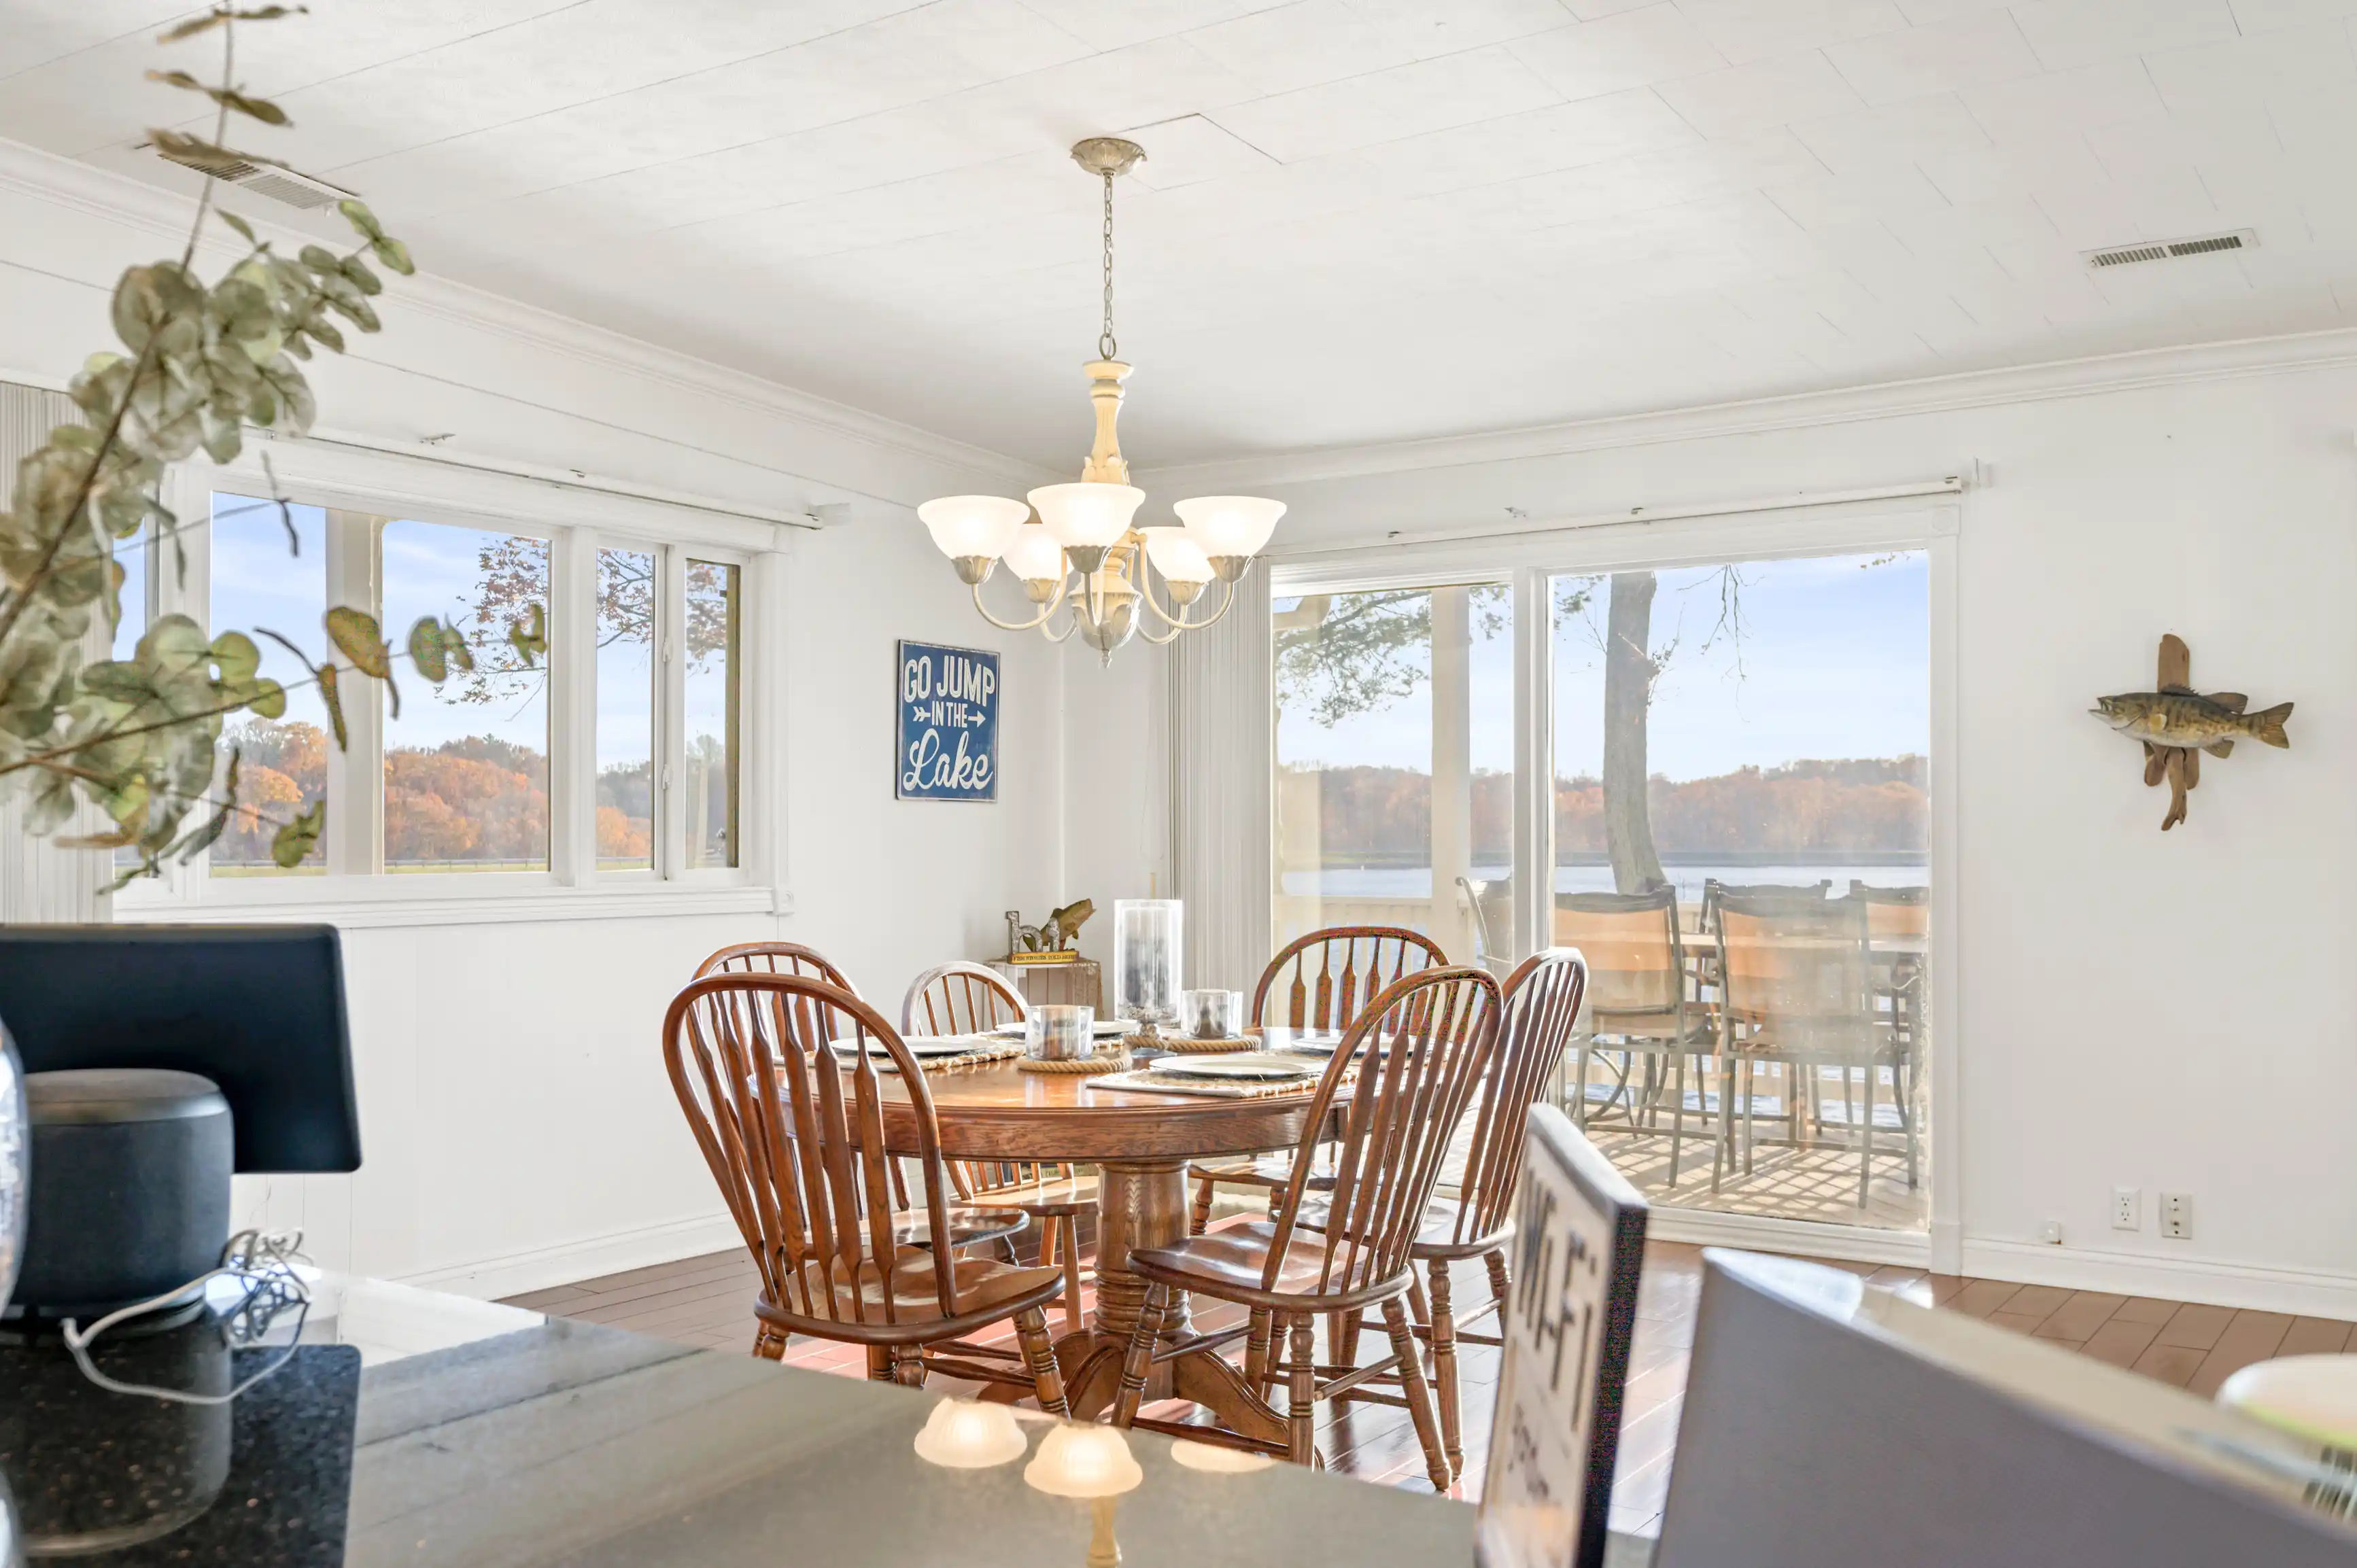 Bright dining room interior with wooden table set, decorative sign on the wall, and scenic lake view through large windows.